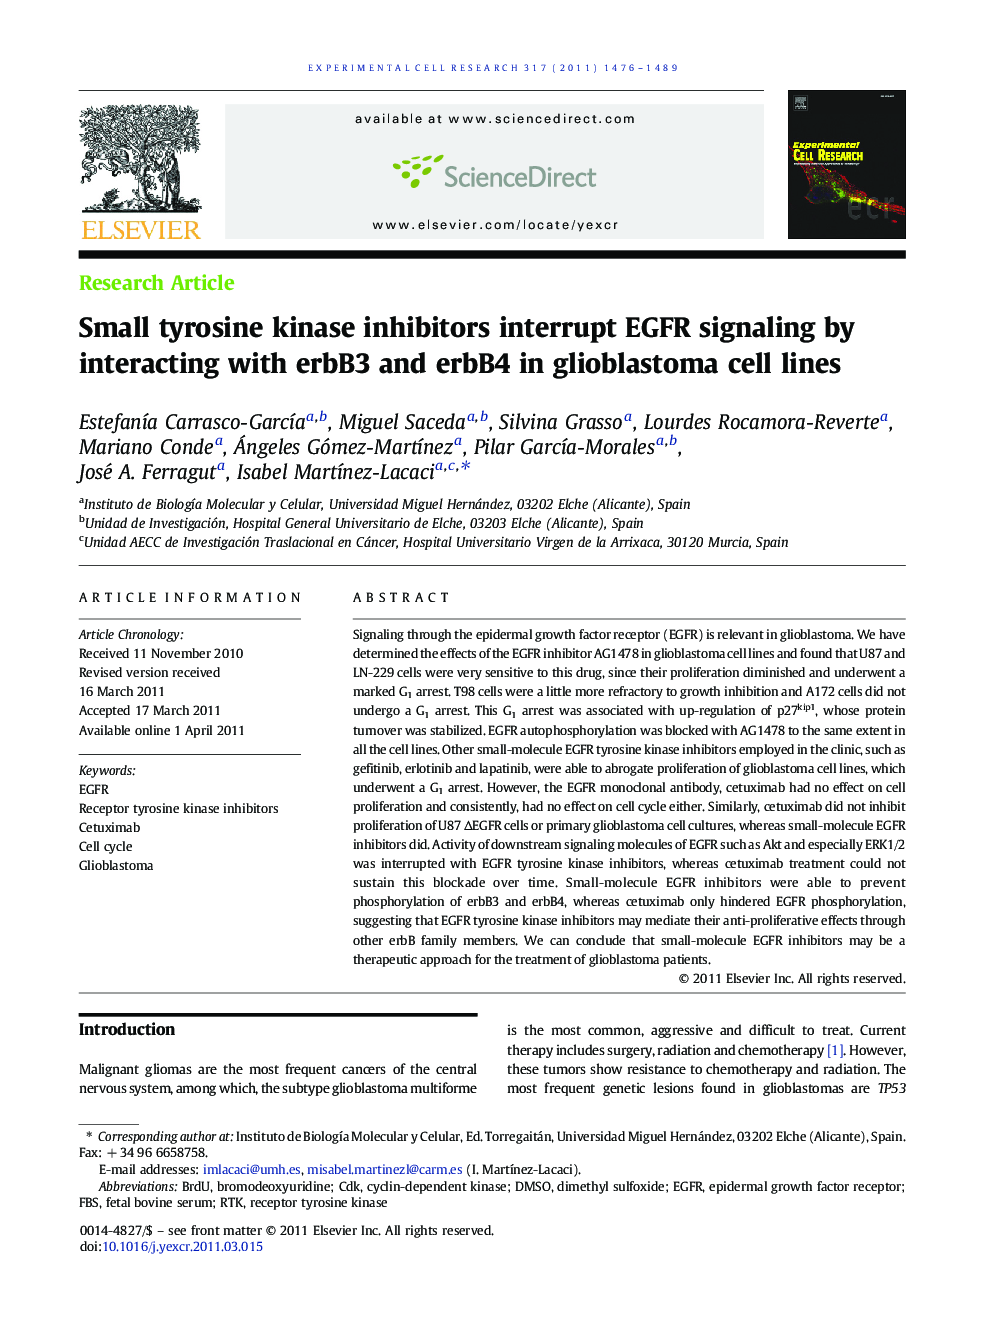 Small tyrosine kinase inhibitors interrupt EGFR signaling by interacting with erbB3 and erbB4 in glioblastoma cell lines